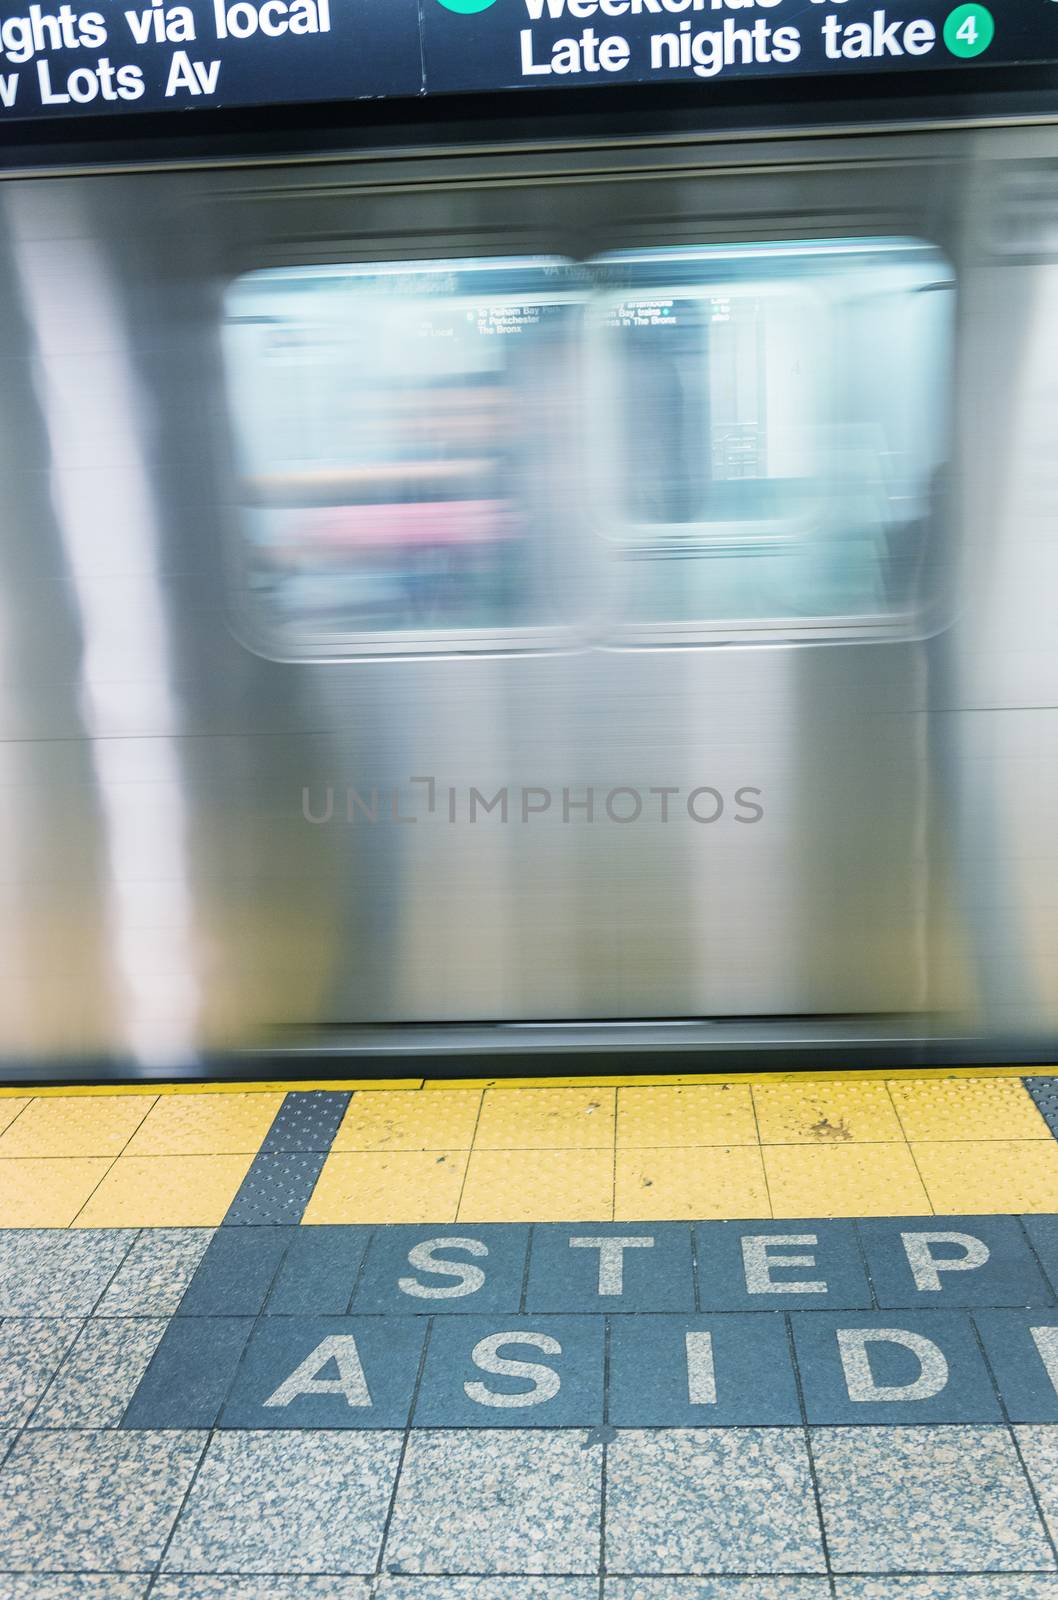 Step aside text inside New York subway by jovannig